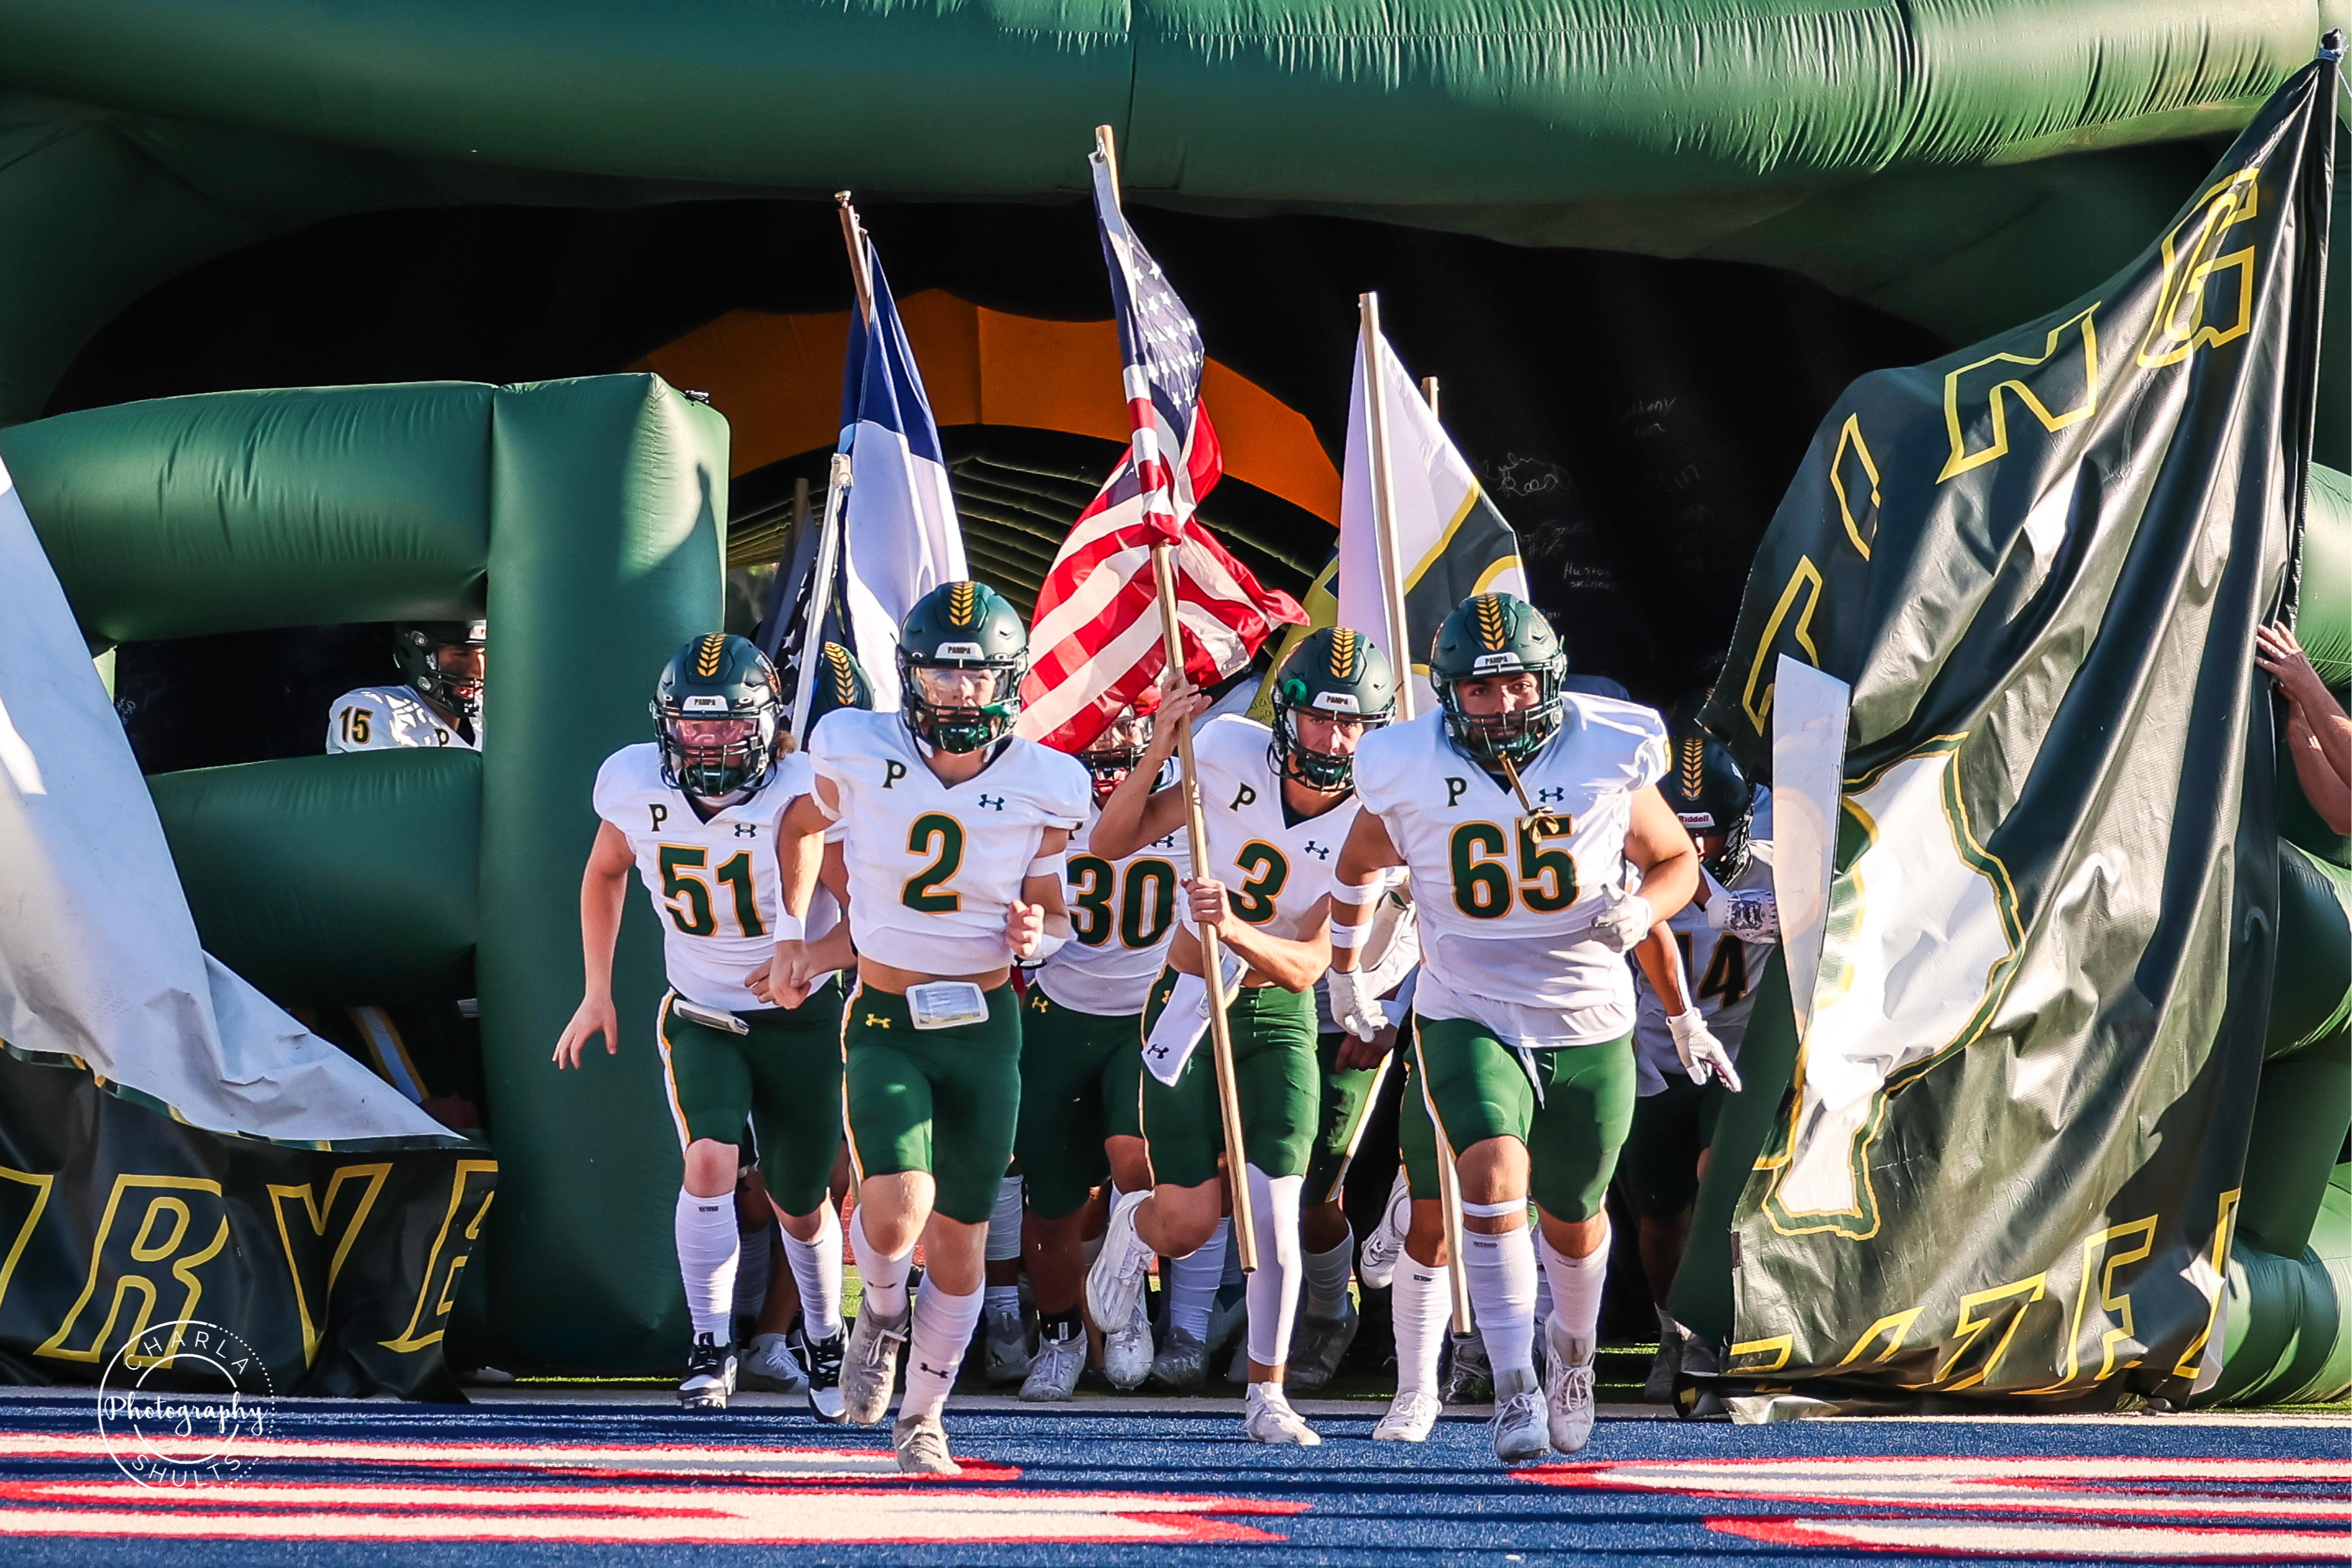 Pampa Harvester Football players running onto field with flags